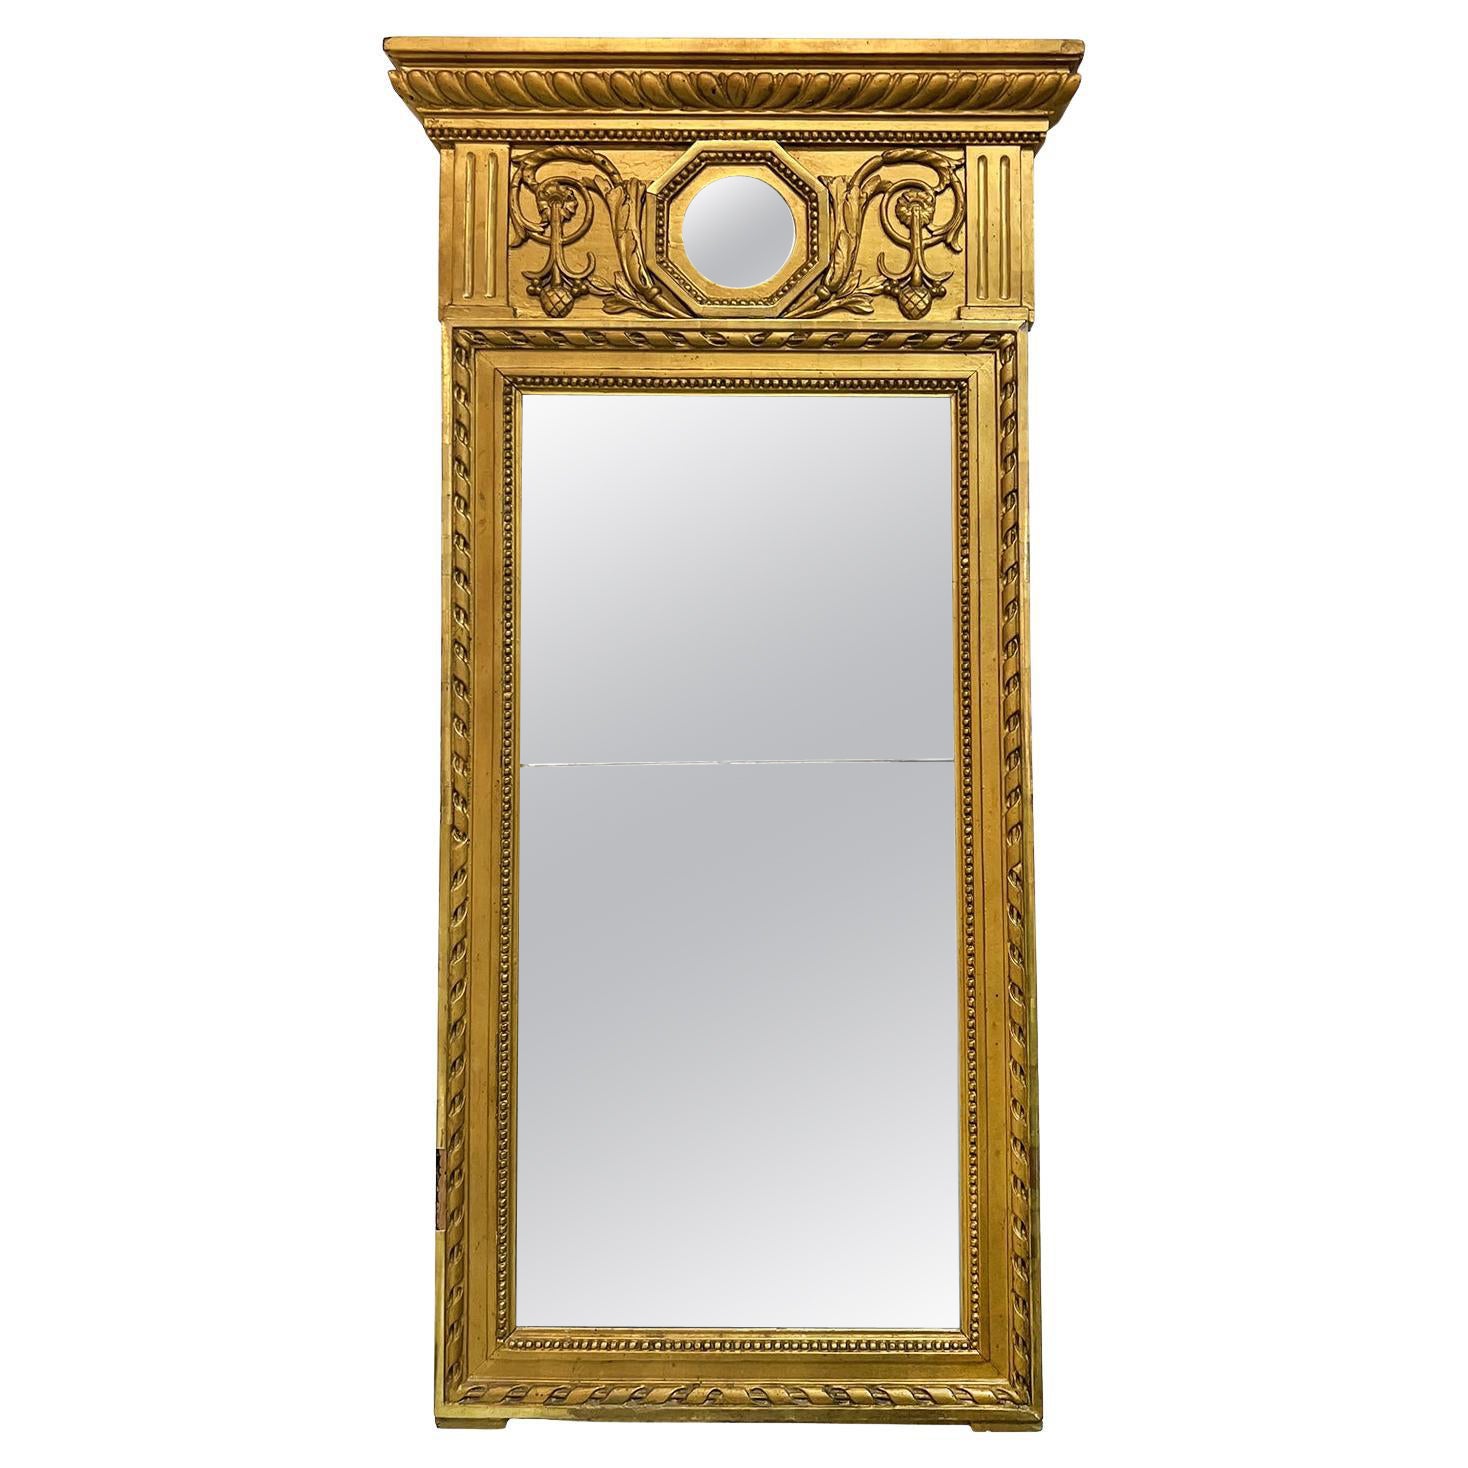 Mirrors at Auction